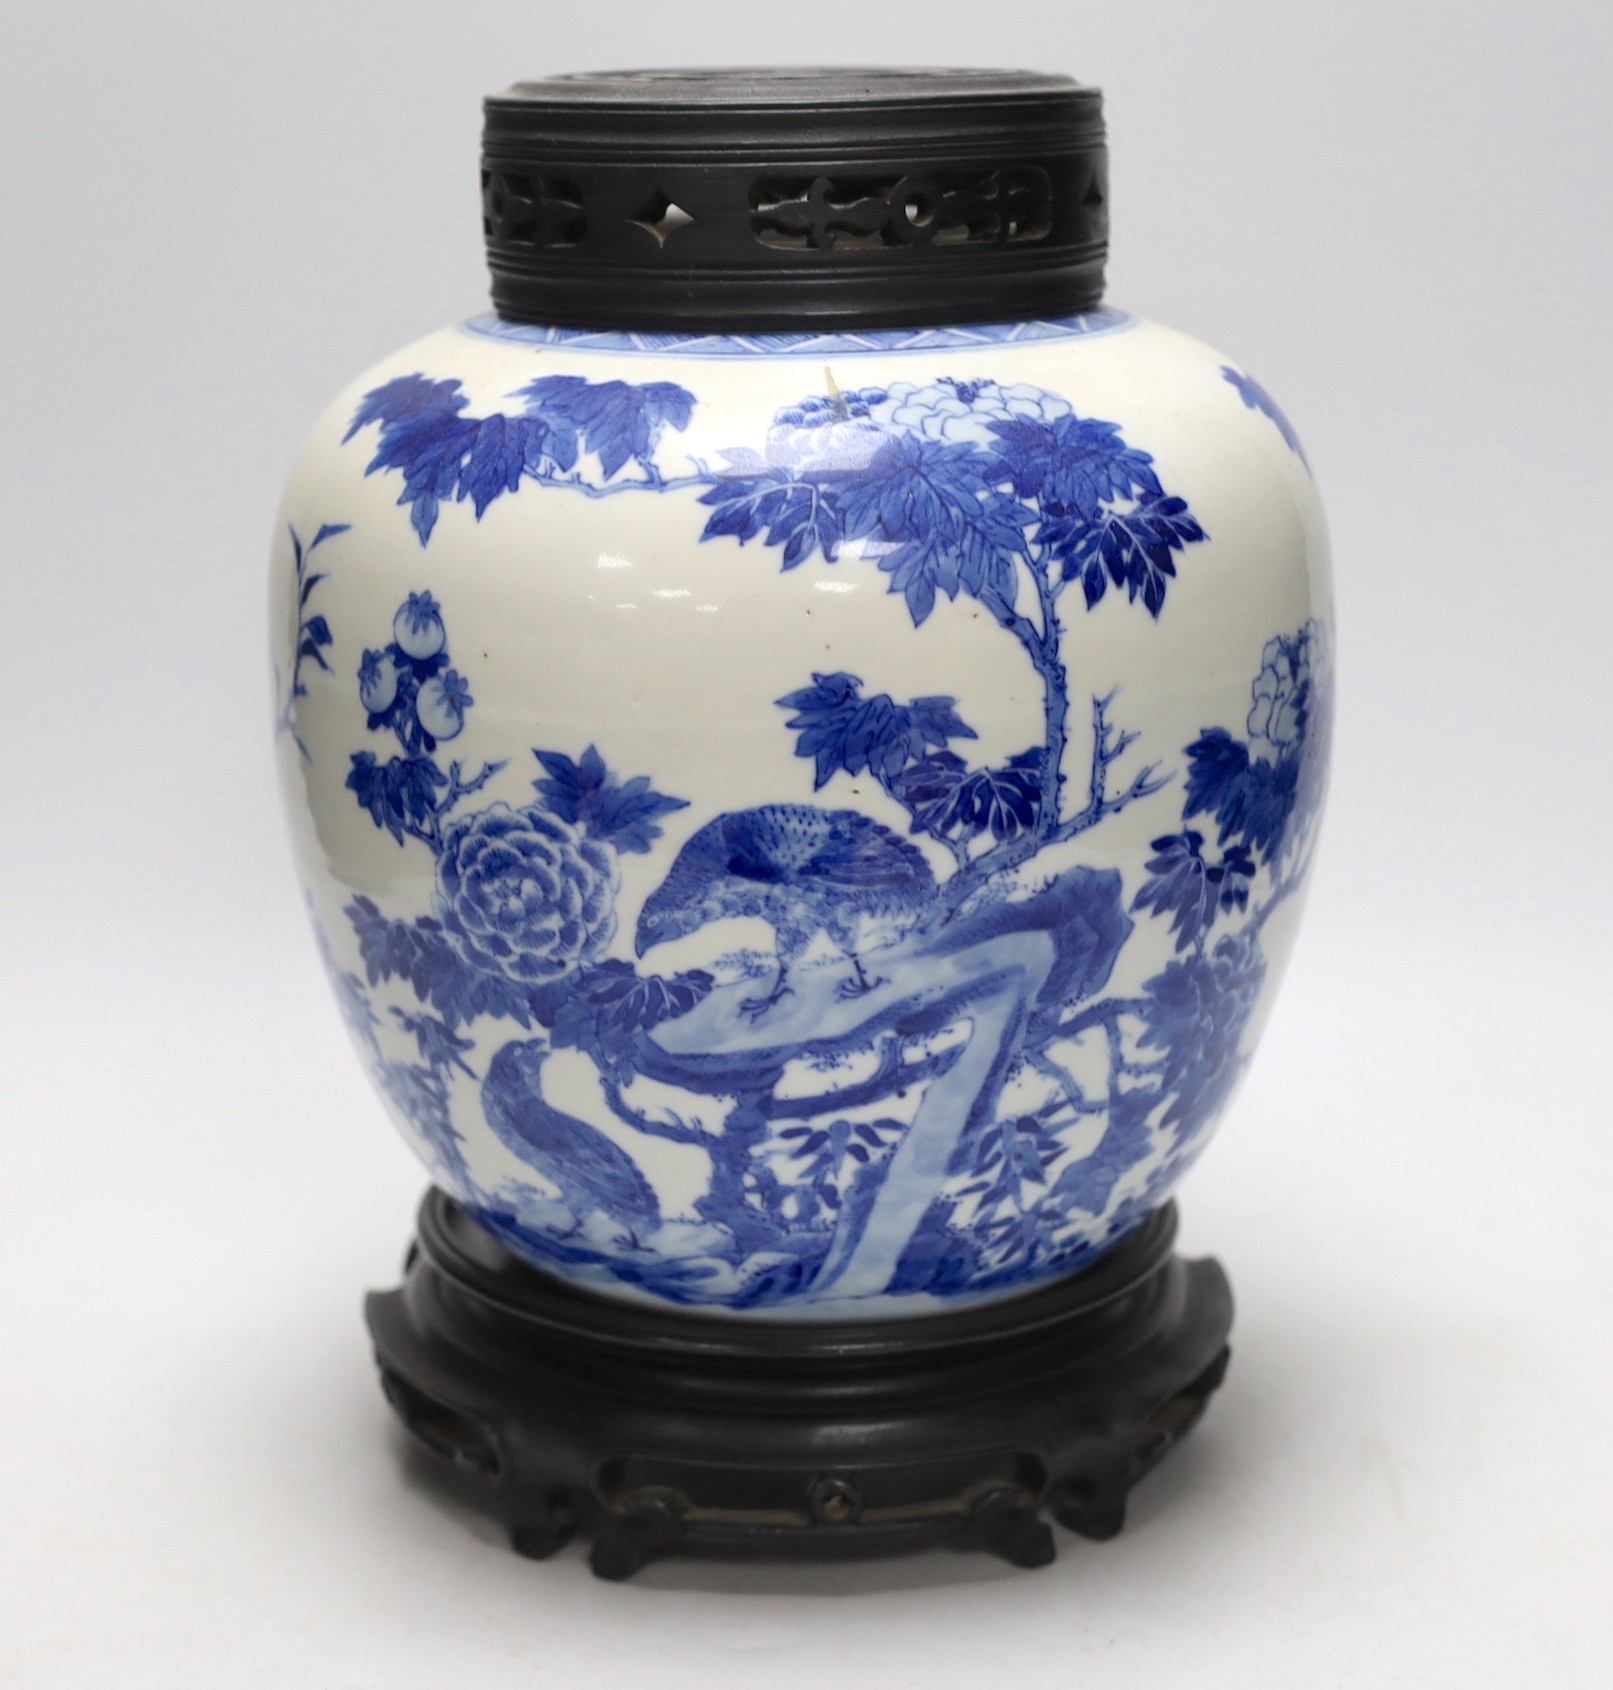 A large Chinese blue and white porcelain jar, 19th century decorated with scenes of birds amongst foliage with associated pierced hardwood cover and stand, 29cms high including stand and cover